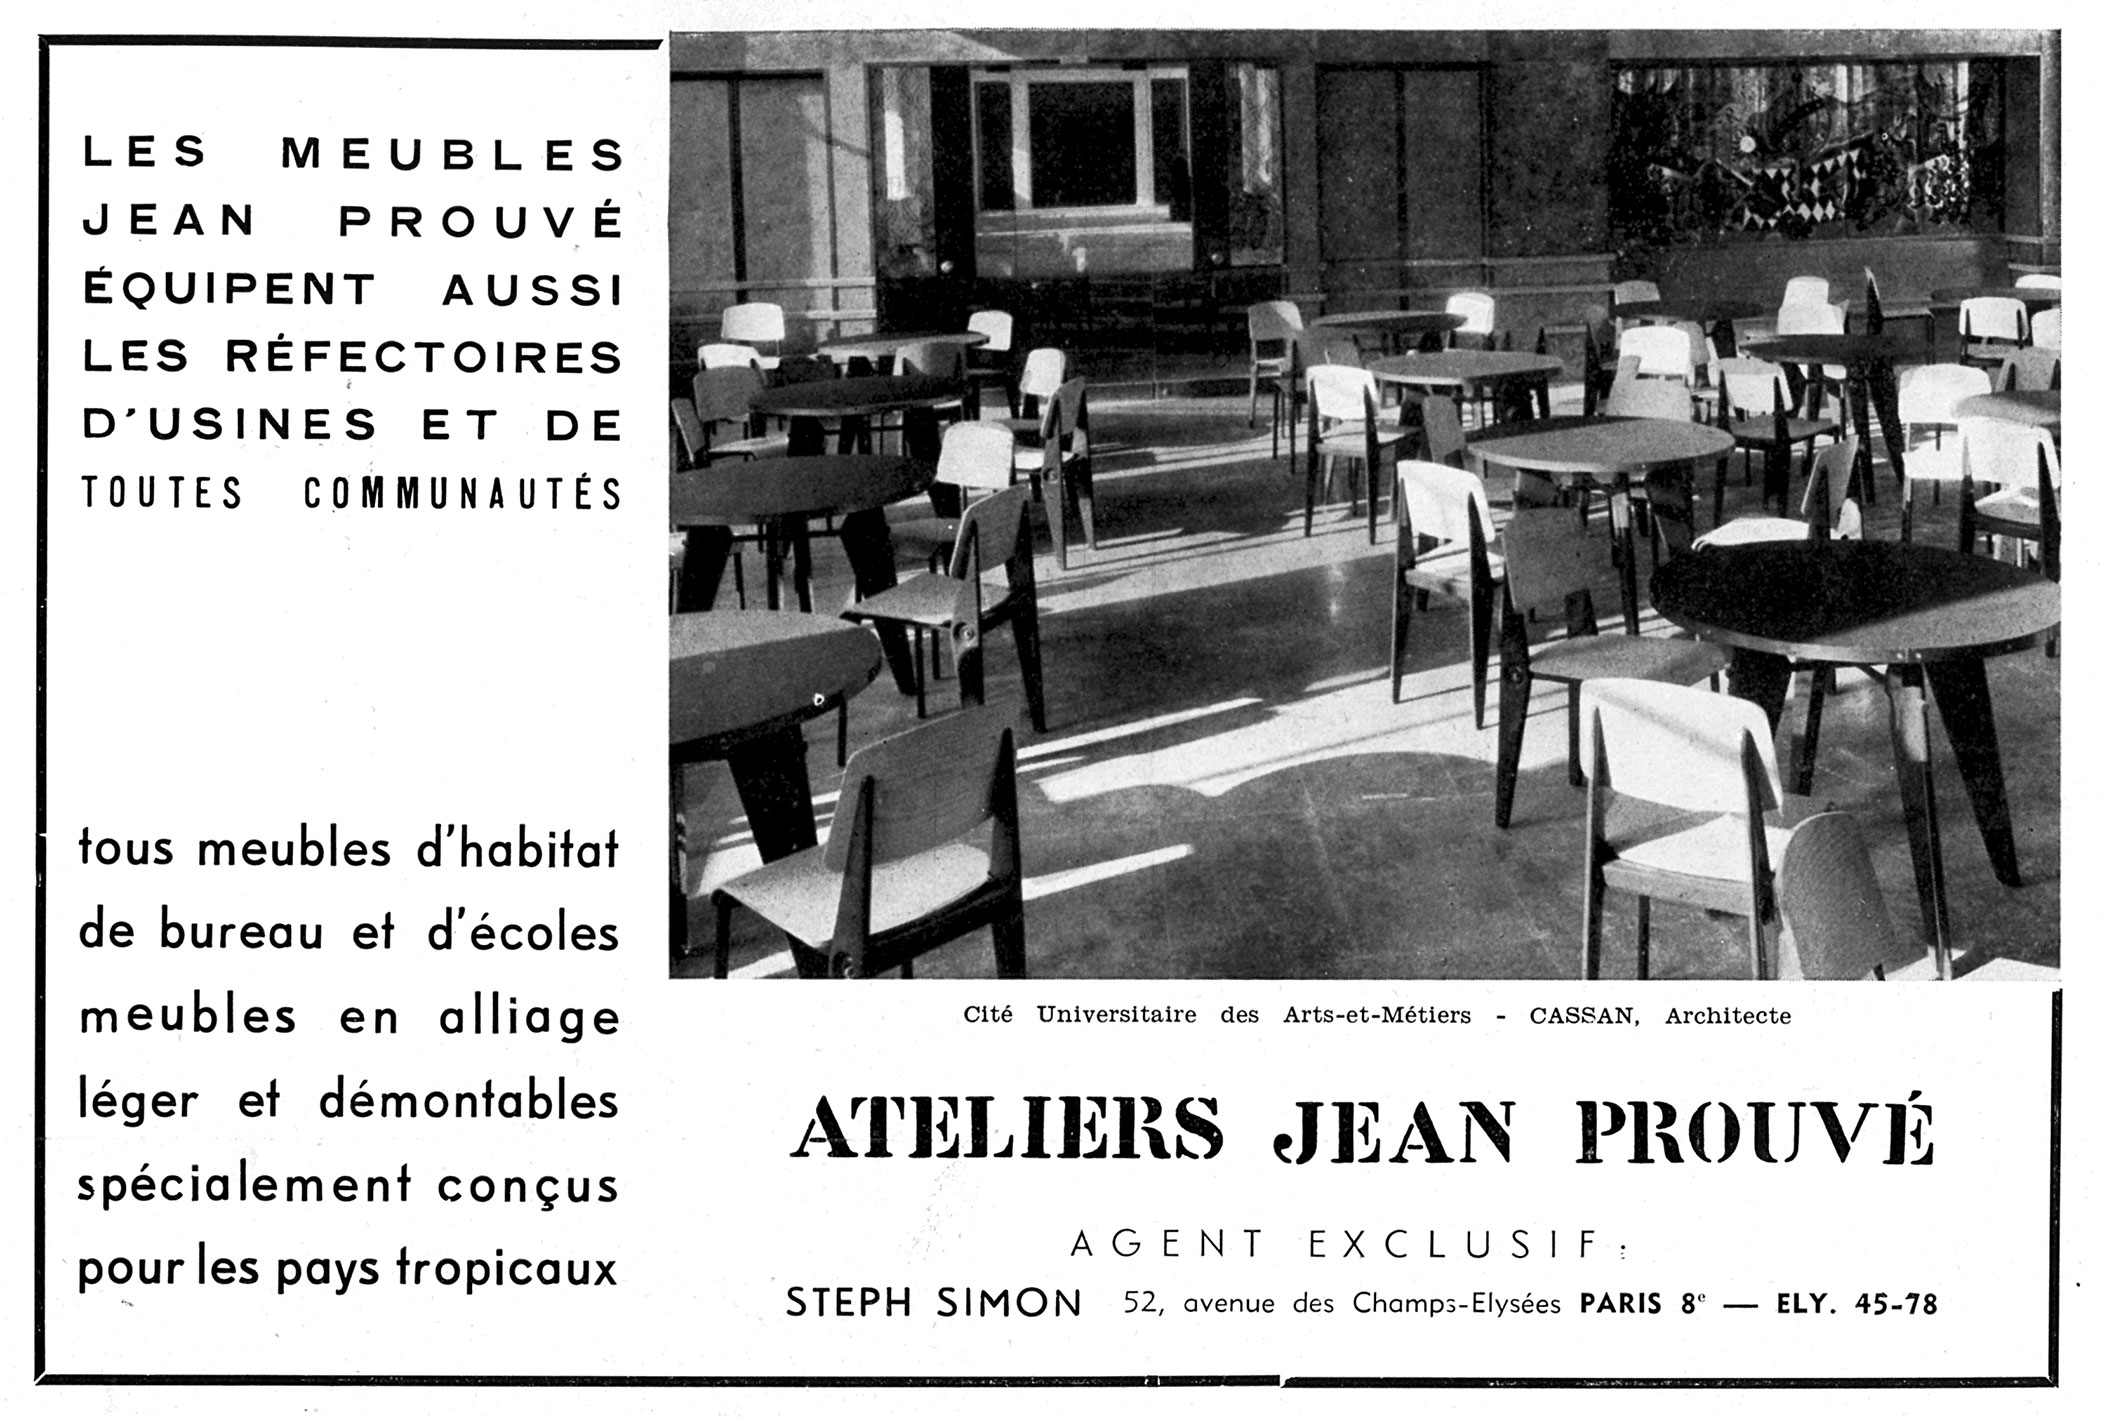 Advertisement from the Ateliers Jean Prouvé, in <i>L’Architecture d’aujourd’hui,</i> no. 37, October 1951.